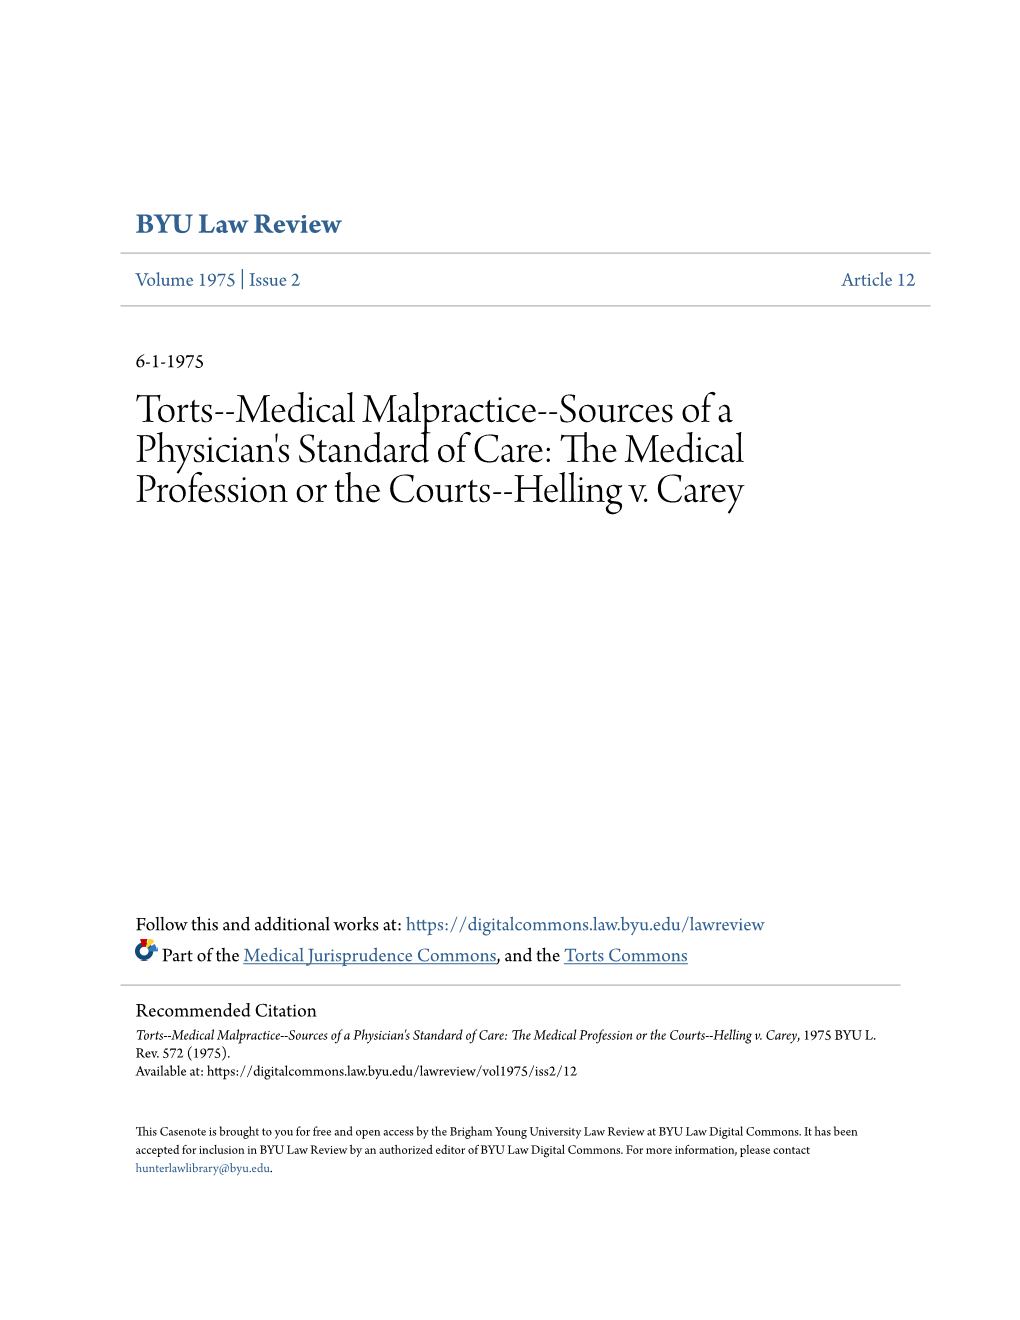 Torts--Medical Malpractice--Sources of a Physician's Standard of Care: the Edicm Al Profession Or the Courts--Helling V